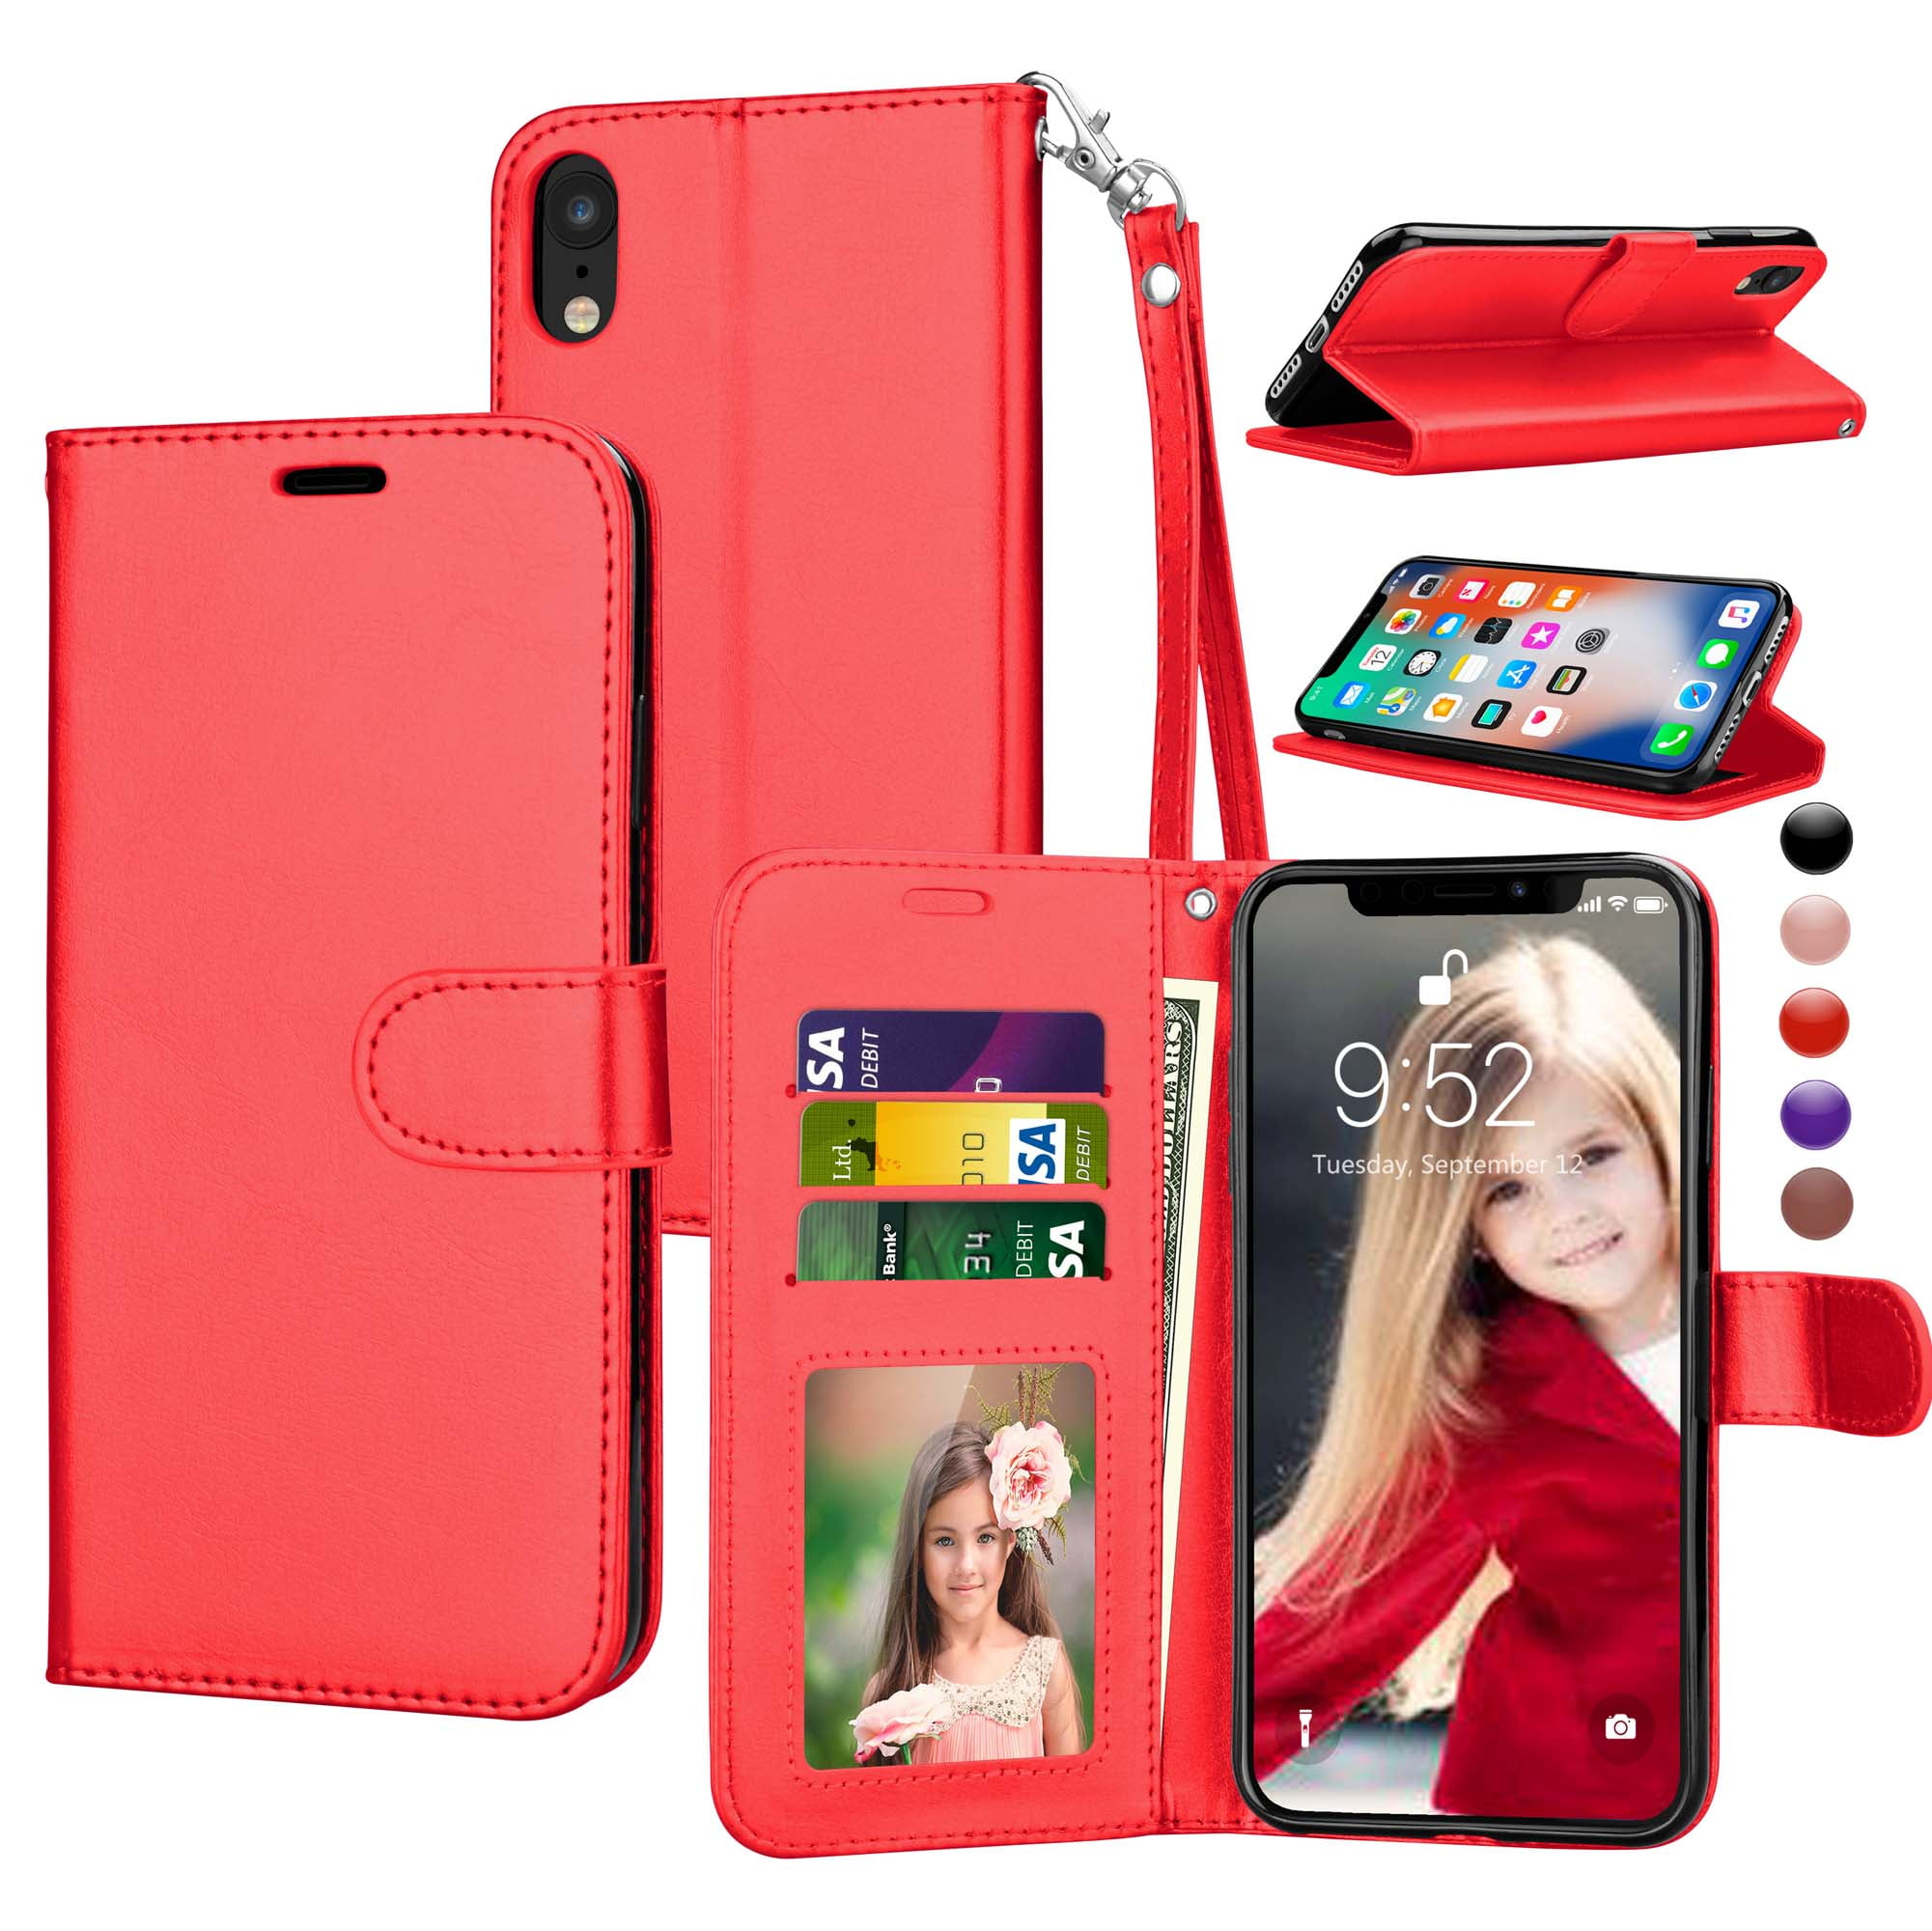 PU Leather Flip Cover Compatible with iPhone XR Chain red Wallet Case for iPhone XR 